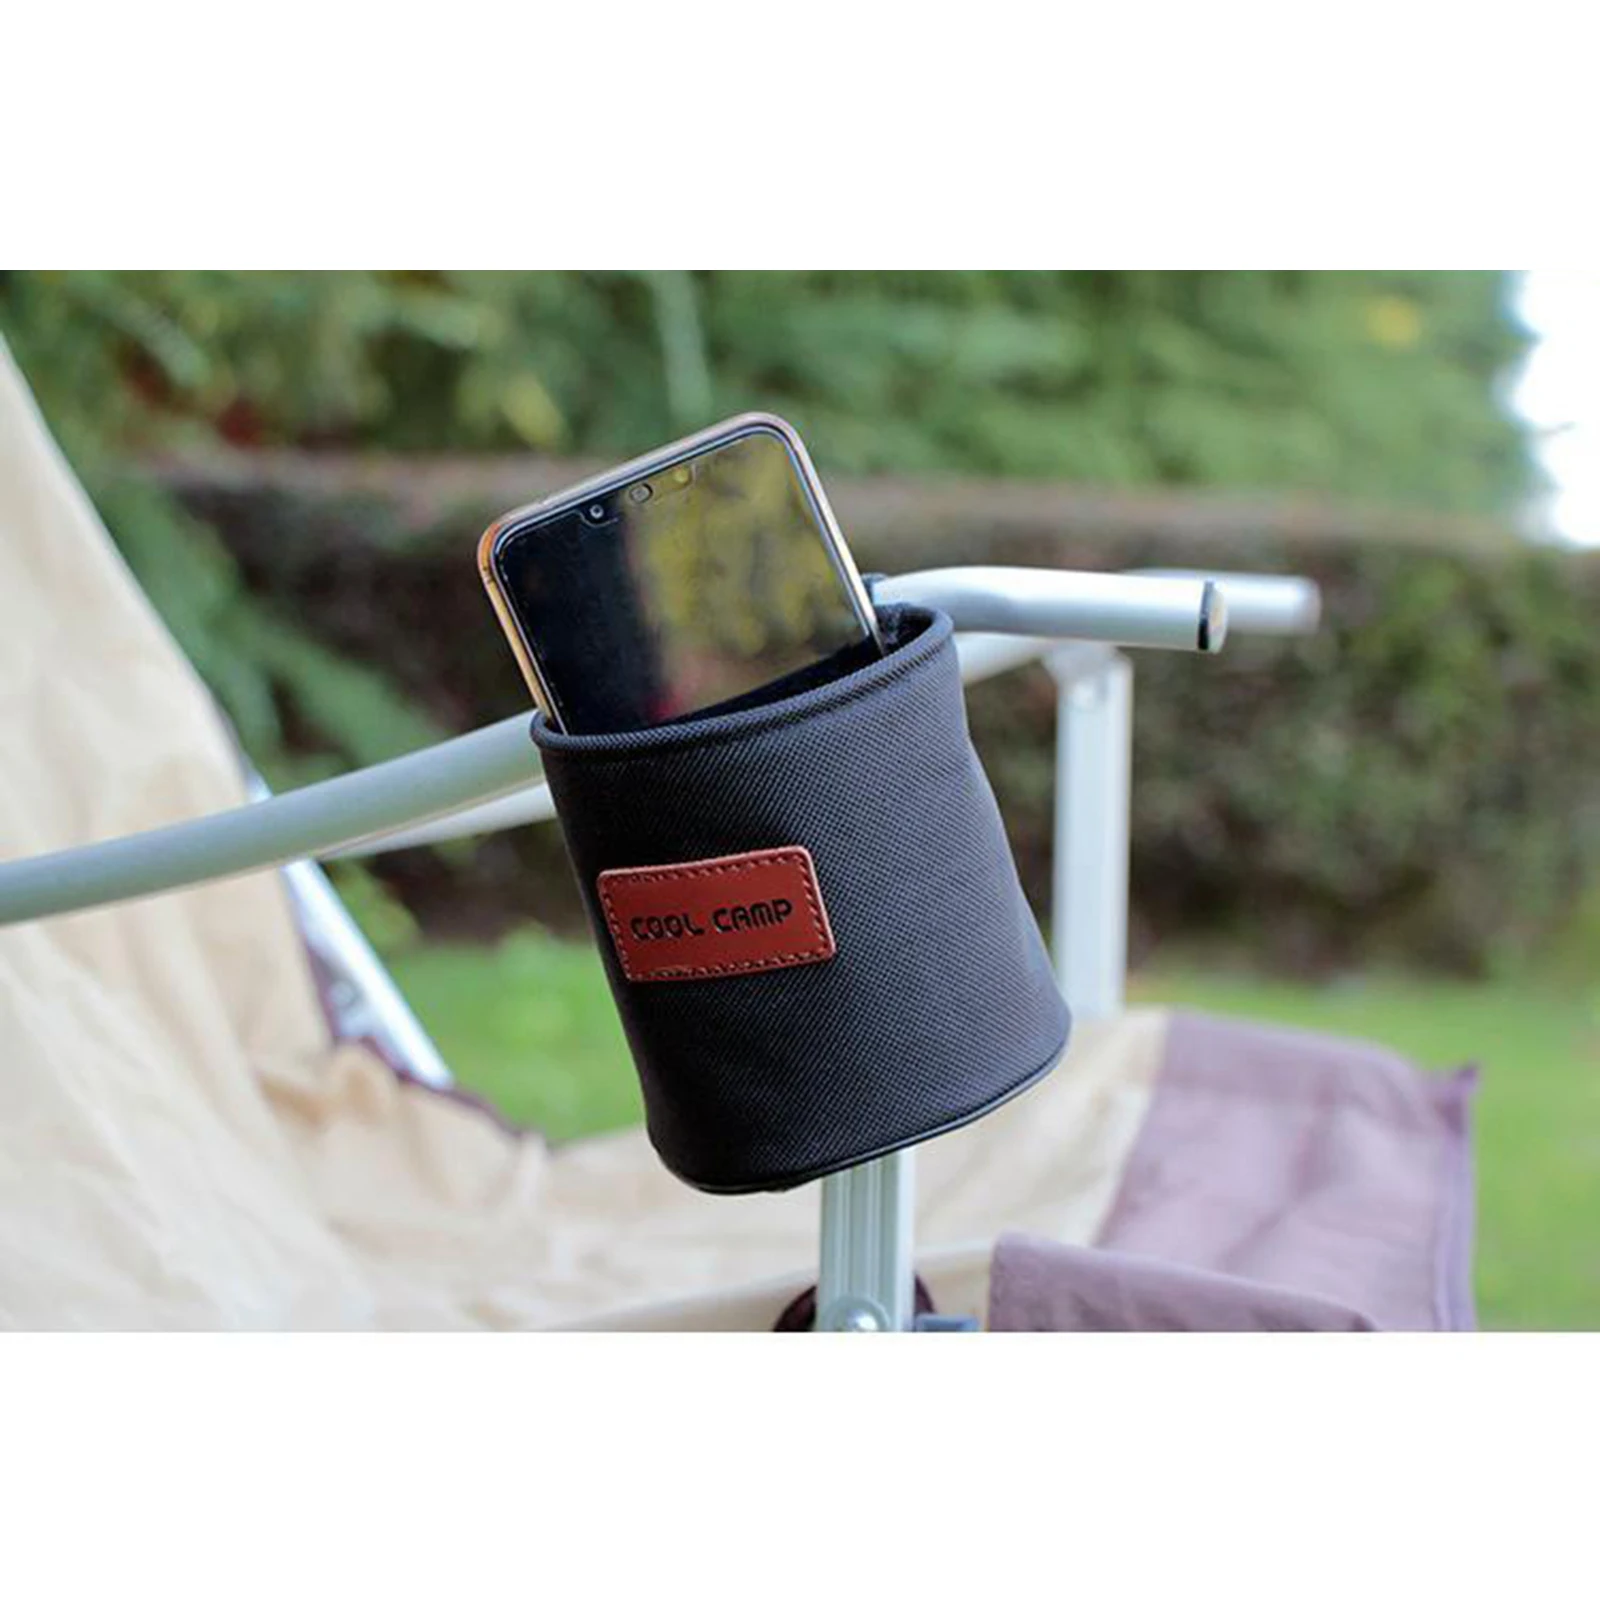 Moutain Bike Water Cup Holder Organizer Drink Water Bottle Mount Stand Chair Side Storage Bag For Outdoor Cycling Camping